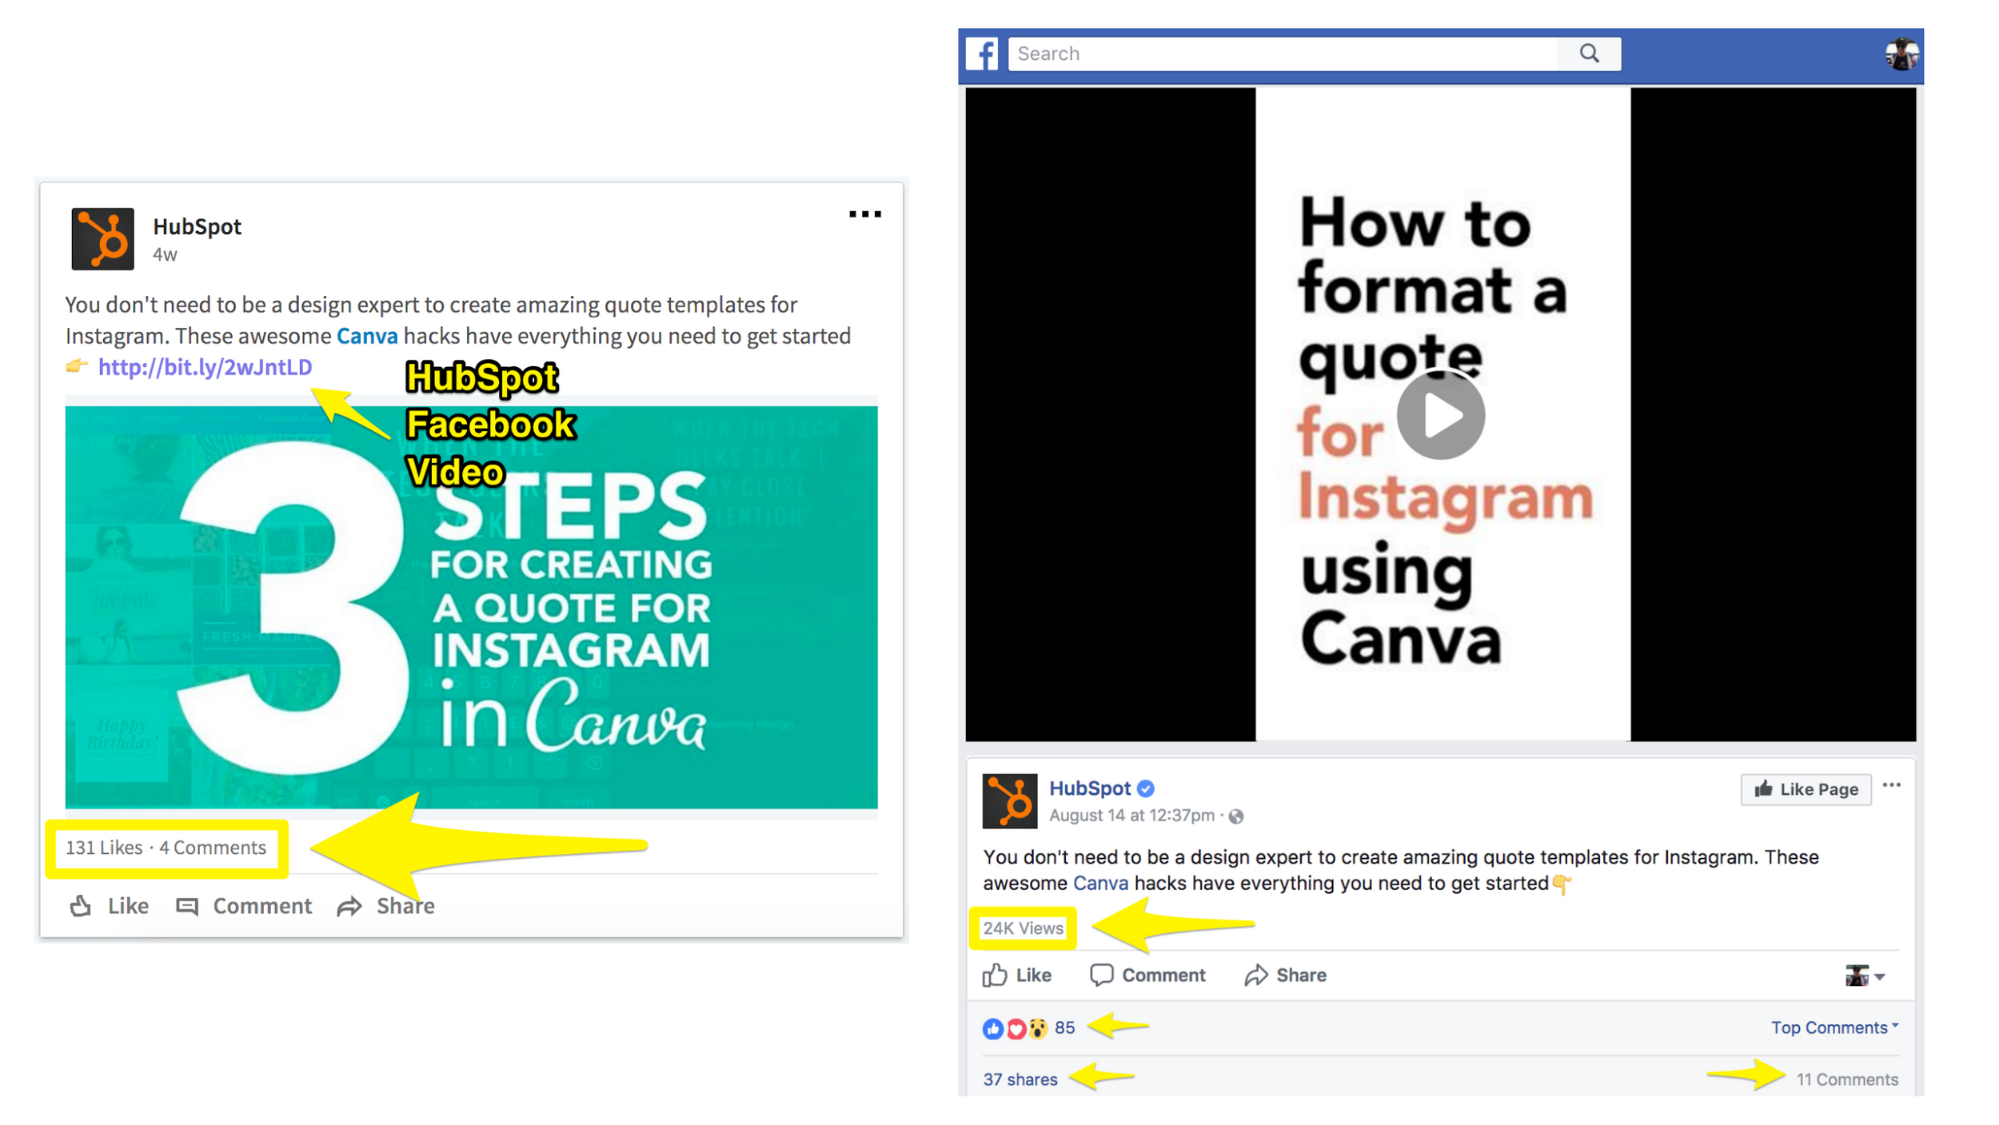 Screenshot showing two different posts by hubspot